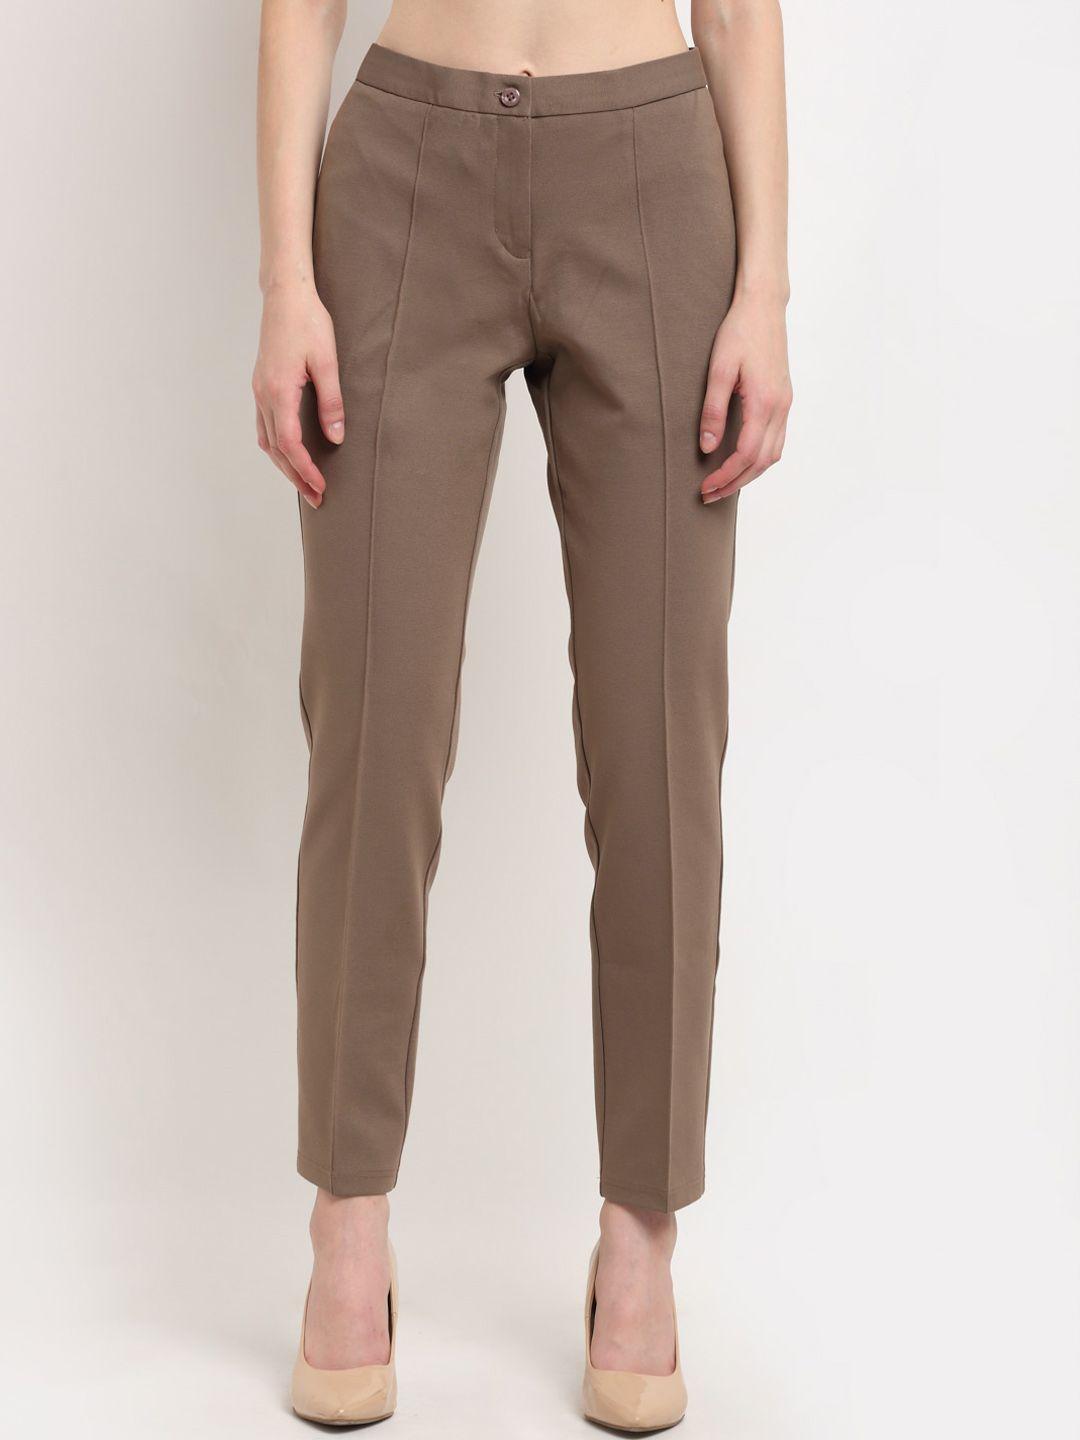 crozo-by-cantabil-women-brown-slim-fit-solid-cigerette-trousers